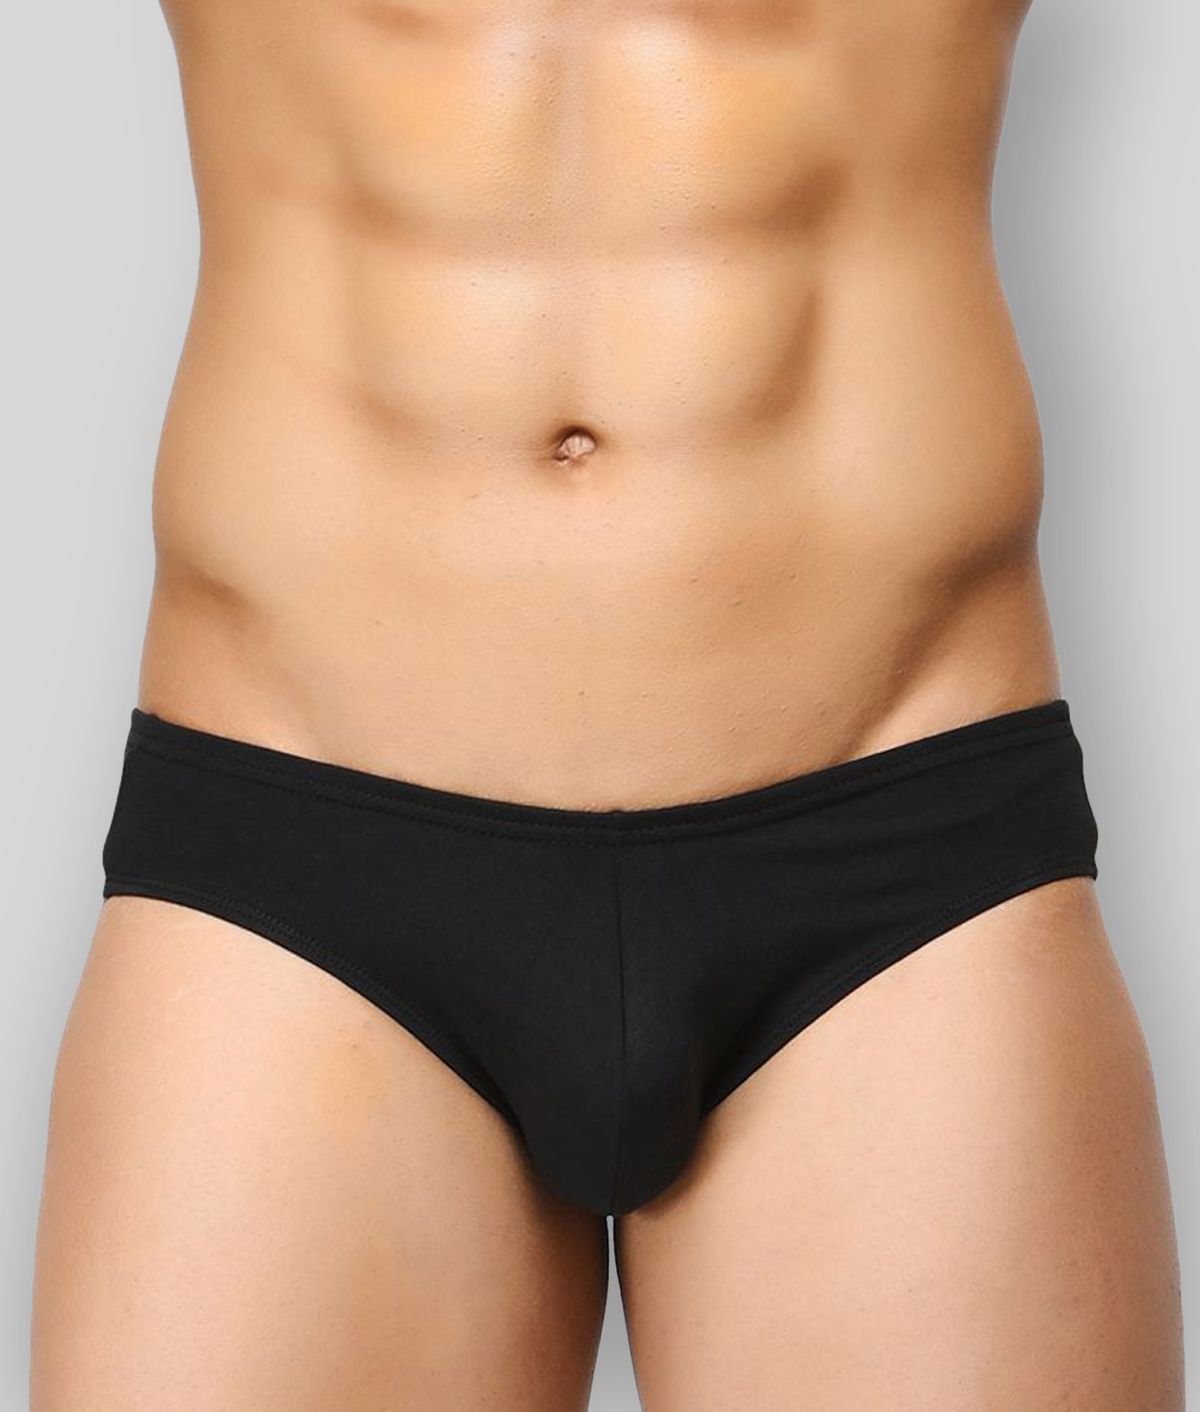     			BASIICS By La Intimo - Black Cotton Men's Briefs ( Pack of 1 )